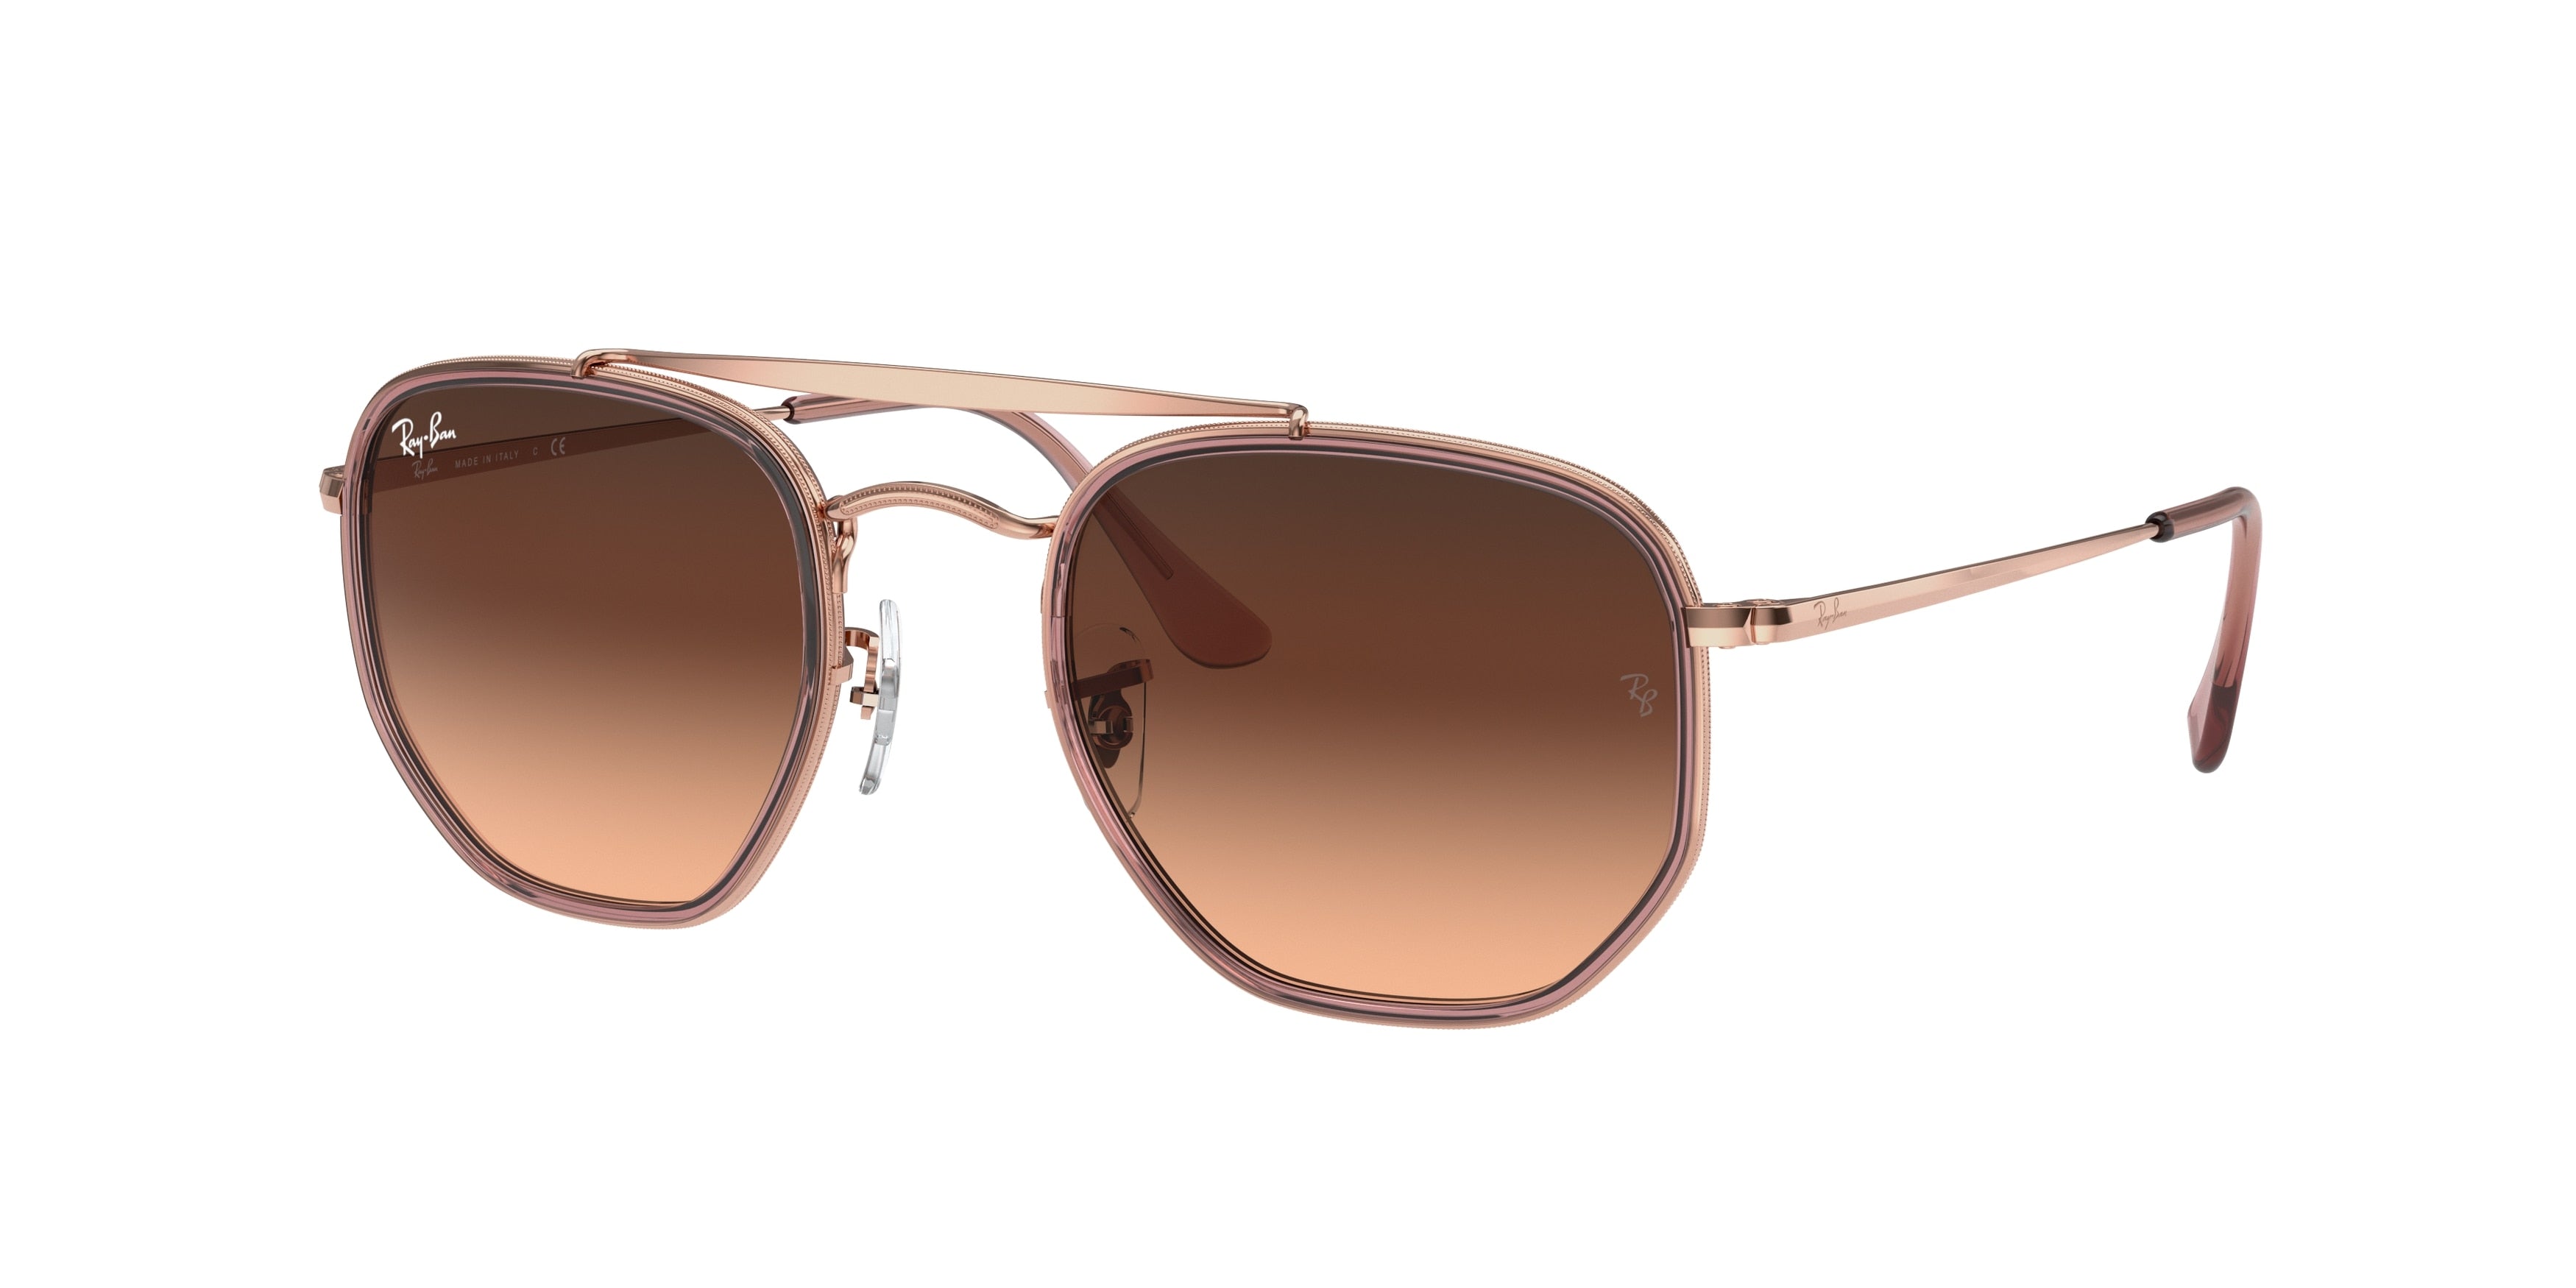 Ray-Ban THE MARSHAL II RB3648M Irregular Sunglasses  9069A5-Copper 52-145-23 - Color Map Copper